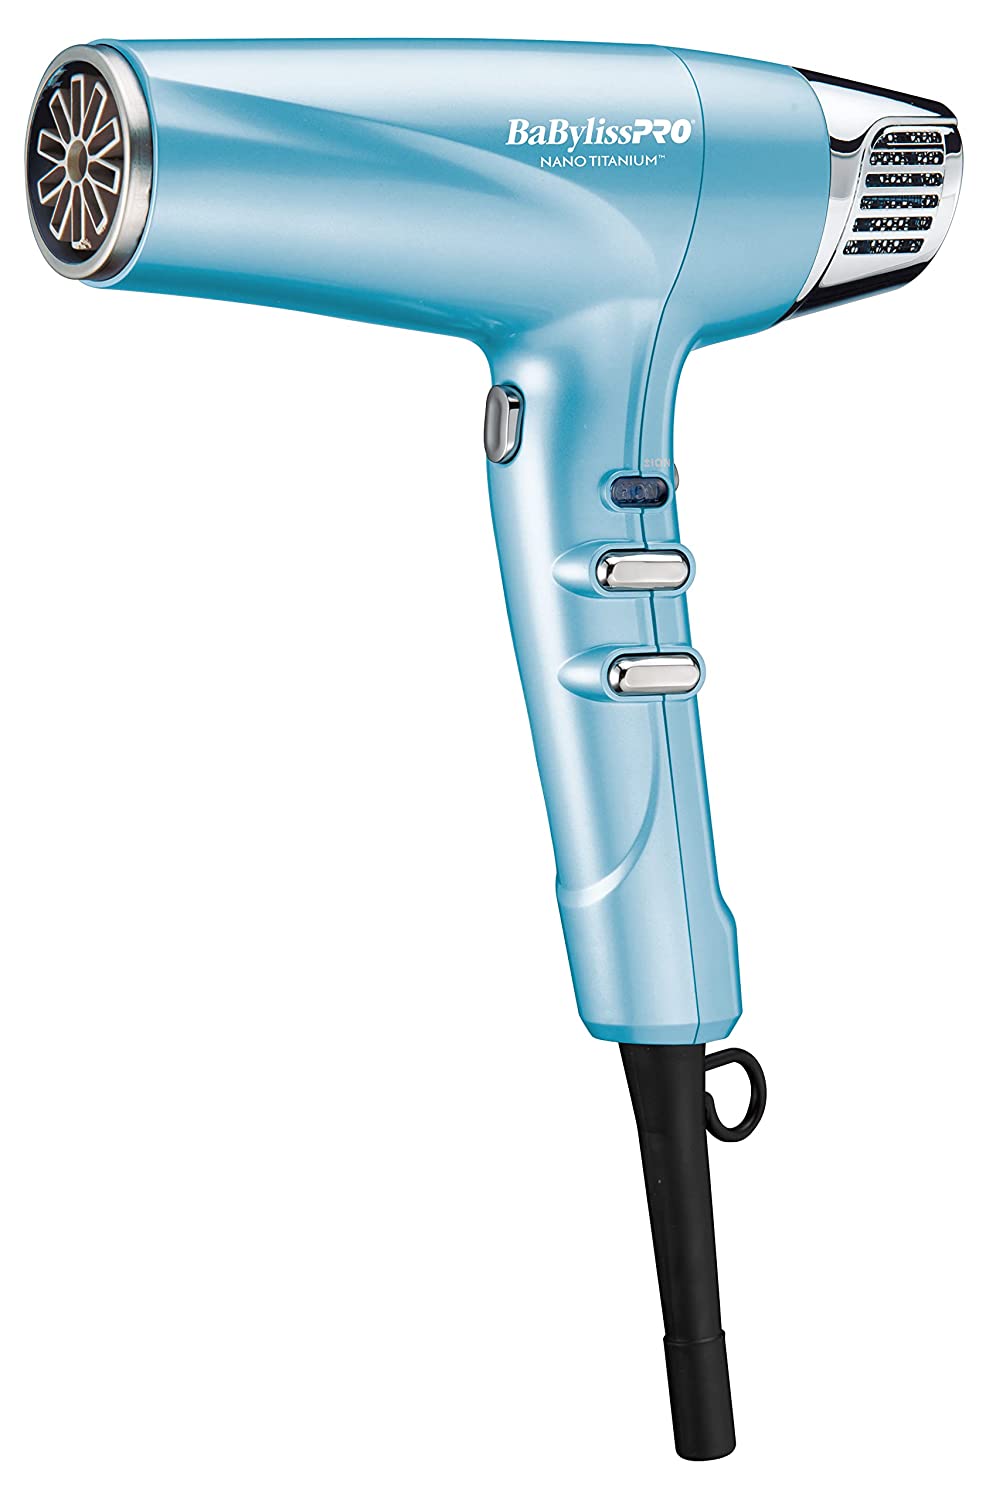 BaBylissPRO Professional Nano Titanium Hair Dryer with Ionic Technology Dries Hair Faster with Les